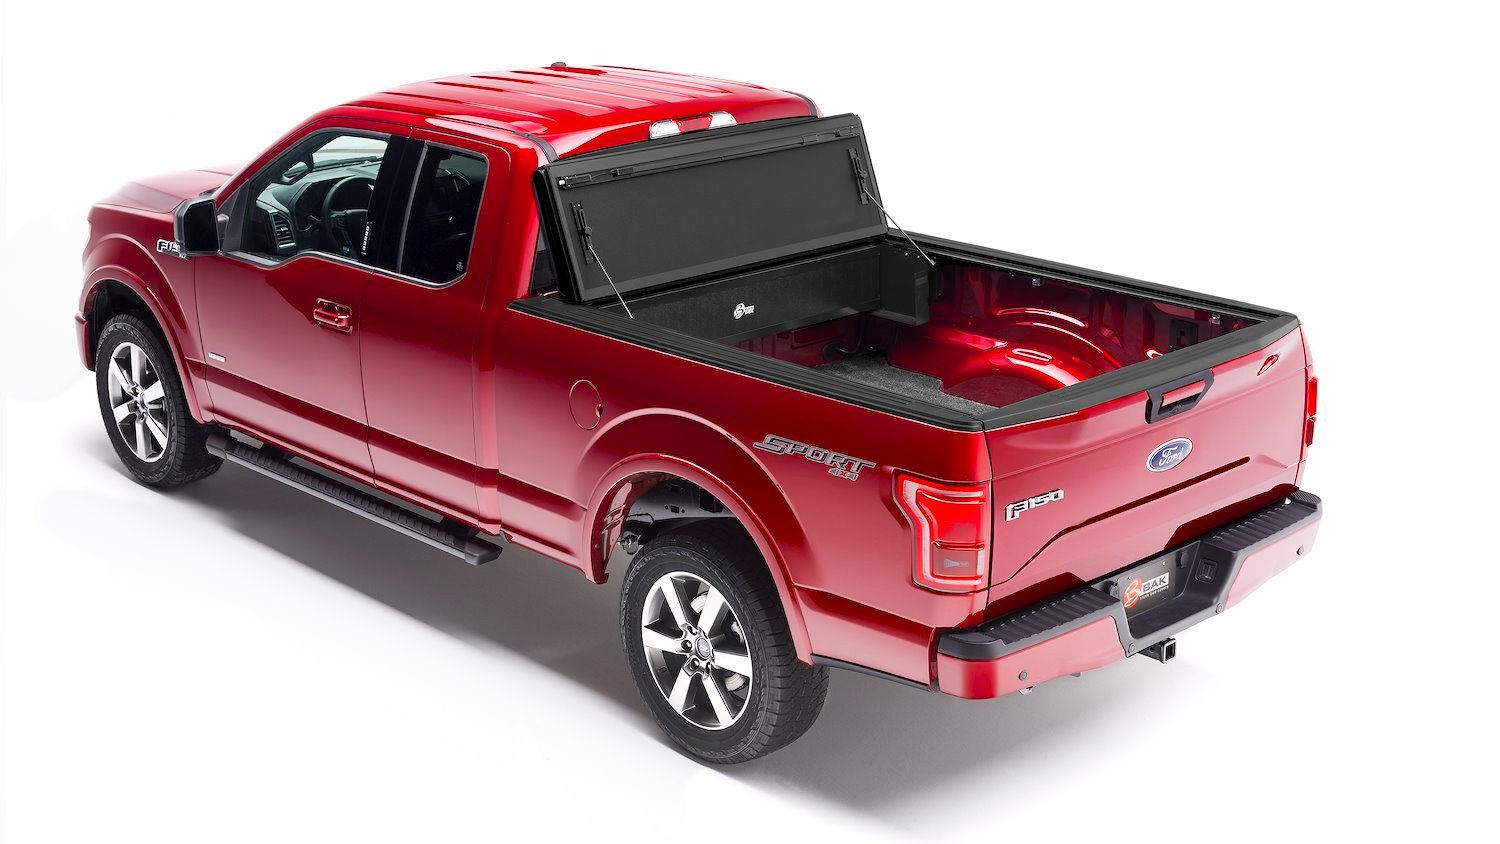 BakBox2 Utility Storage Box Fits Select Ford Super-Duty, Bed Length: 6 ft. 9 in. and 8 ft.